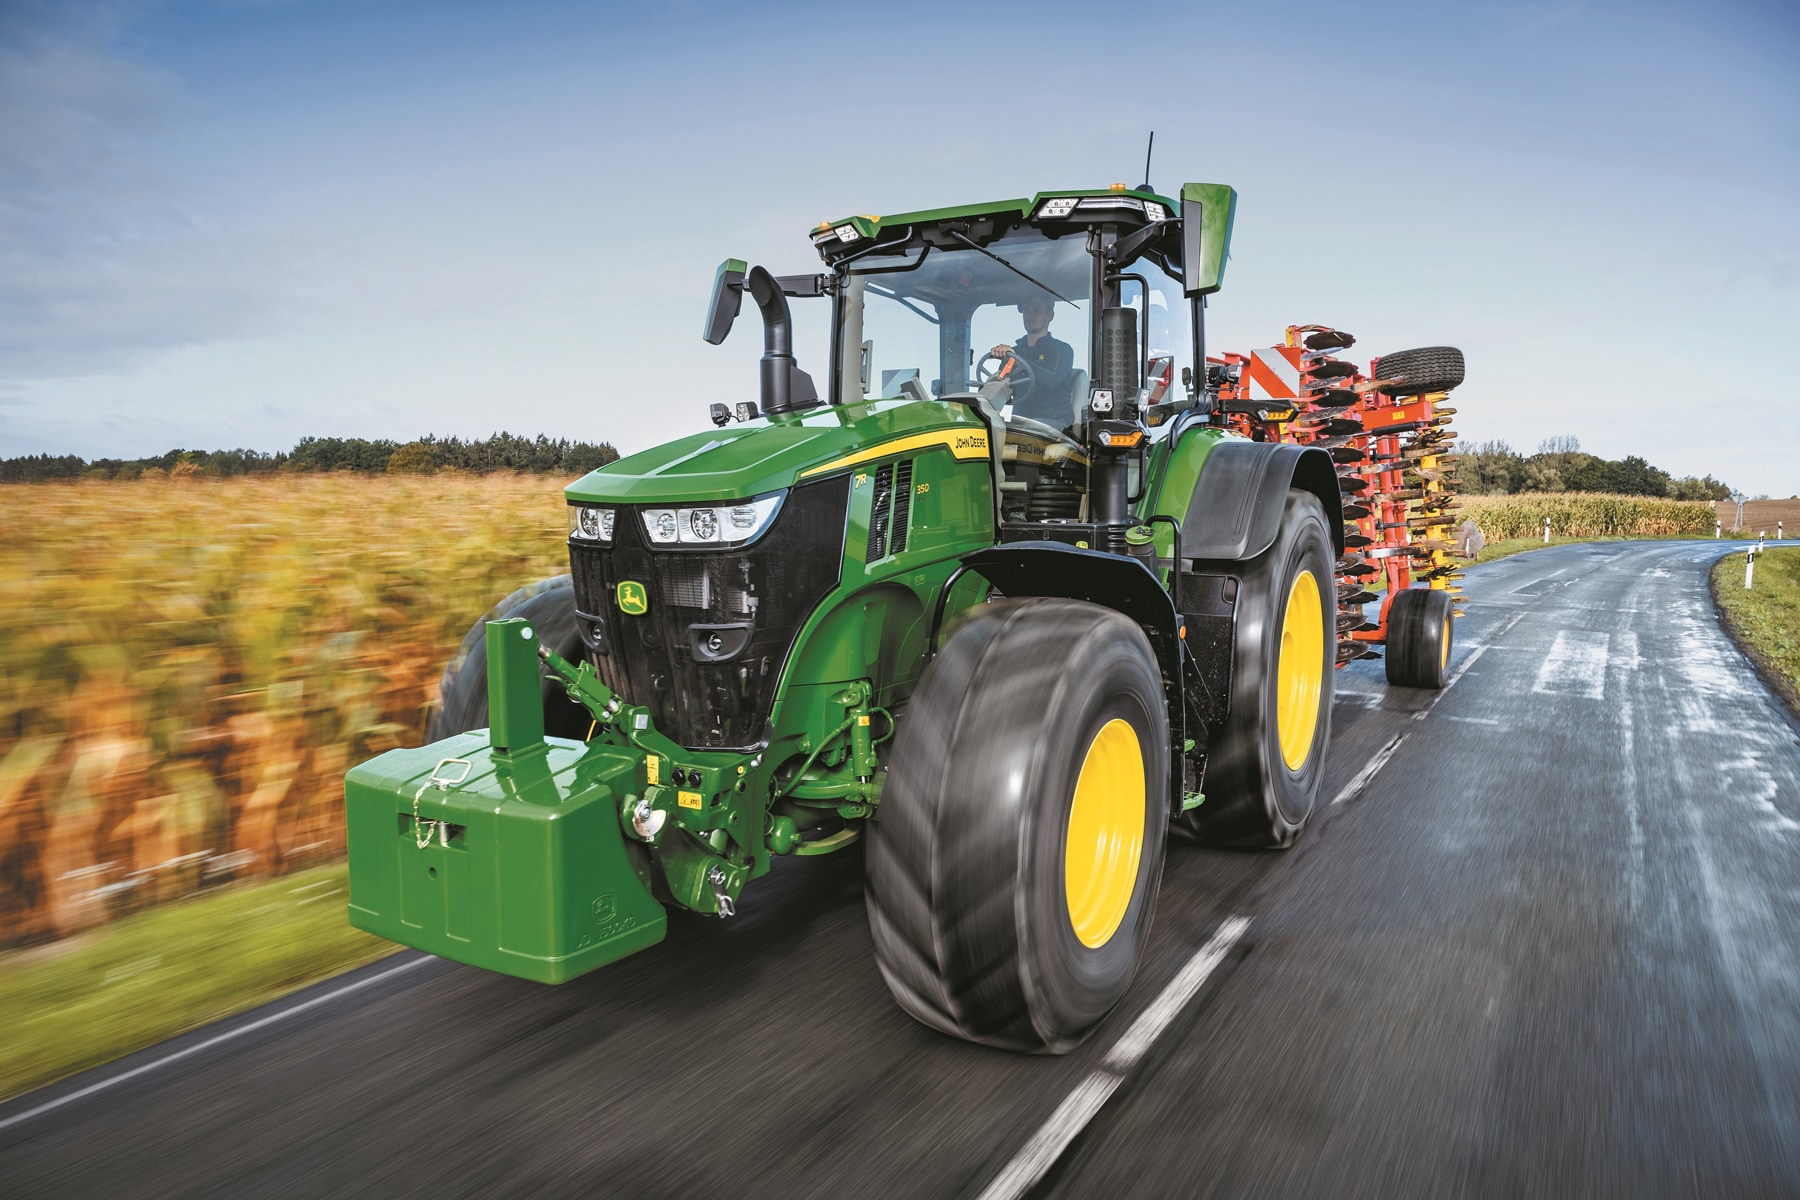 The John Deere 7R 350 has been awarded Tractor of the Year for 2022.